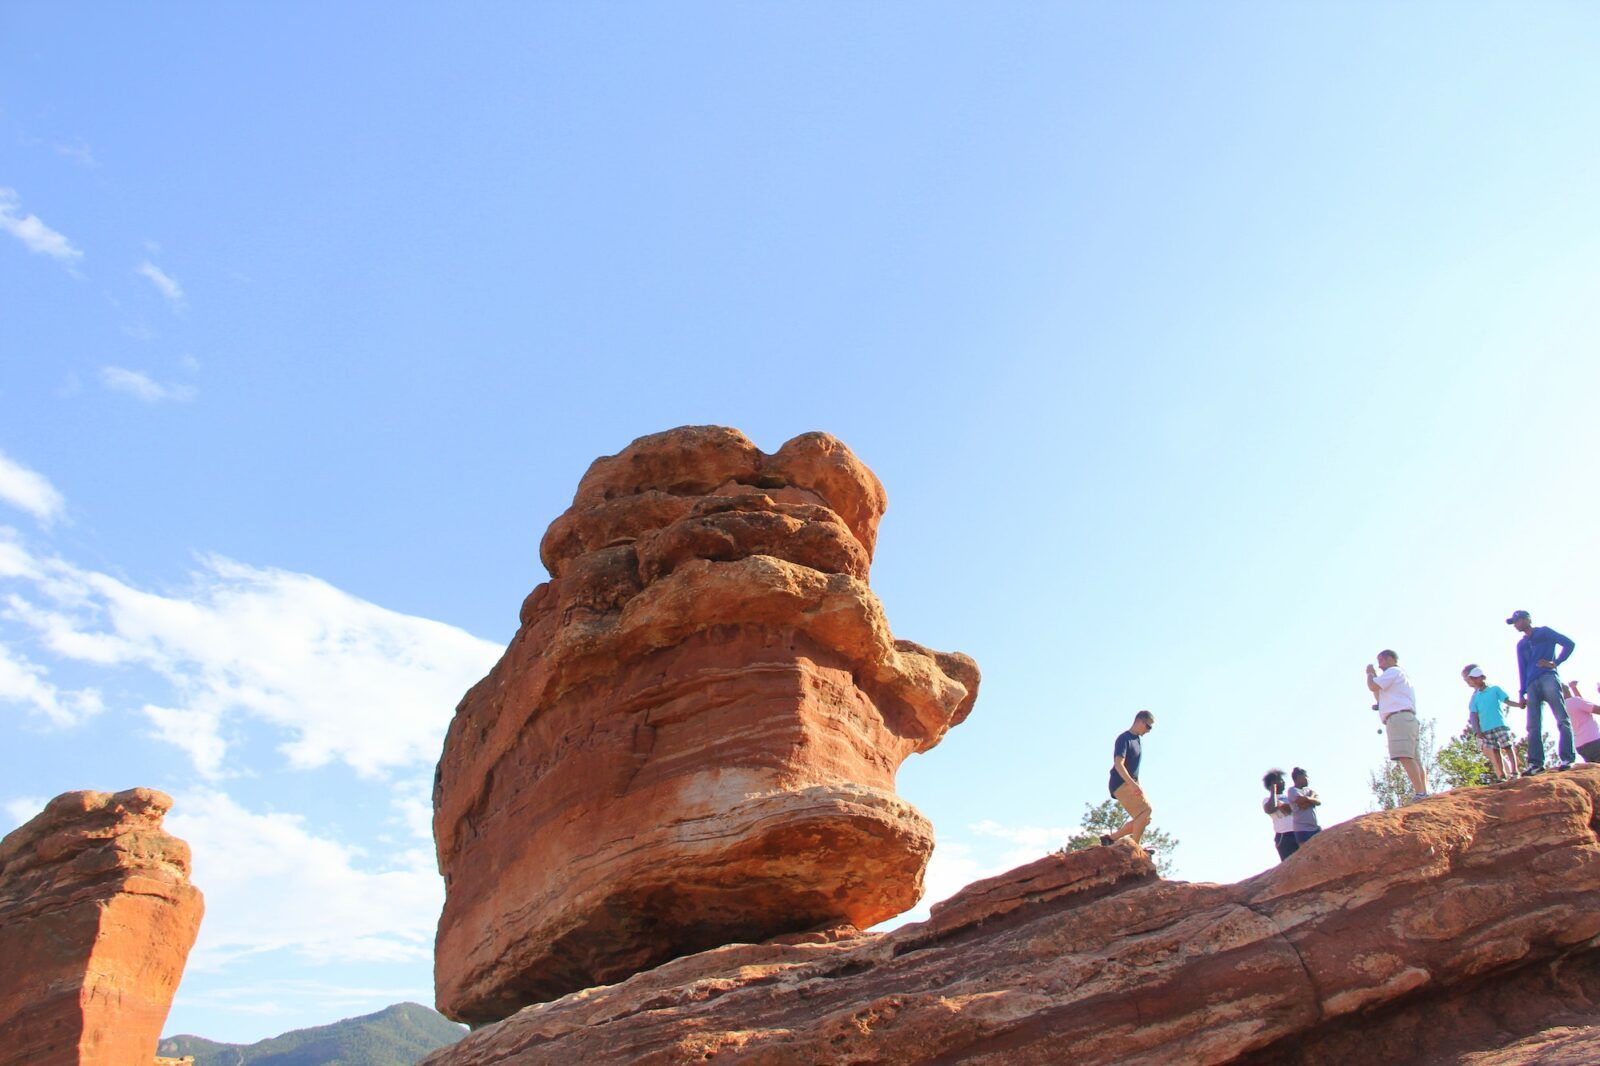 Hikers exploring on top of a rock formation at The Garden of the Gods Colorado Springs CO having fun